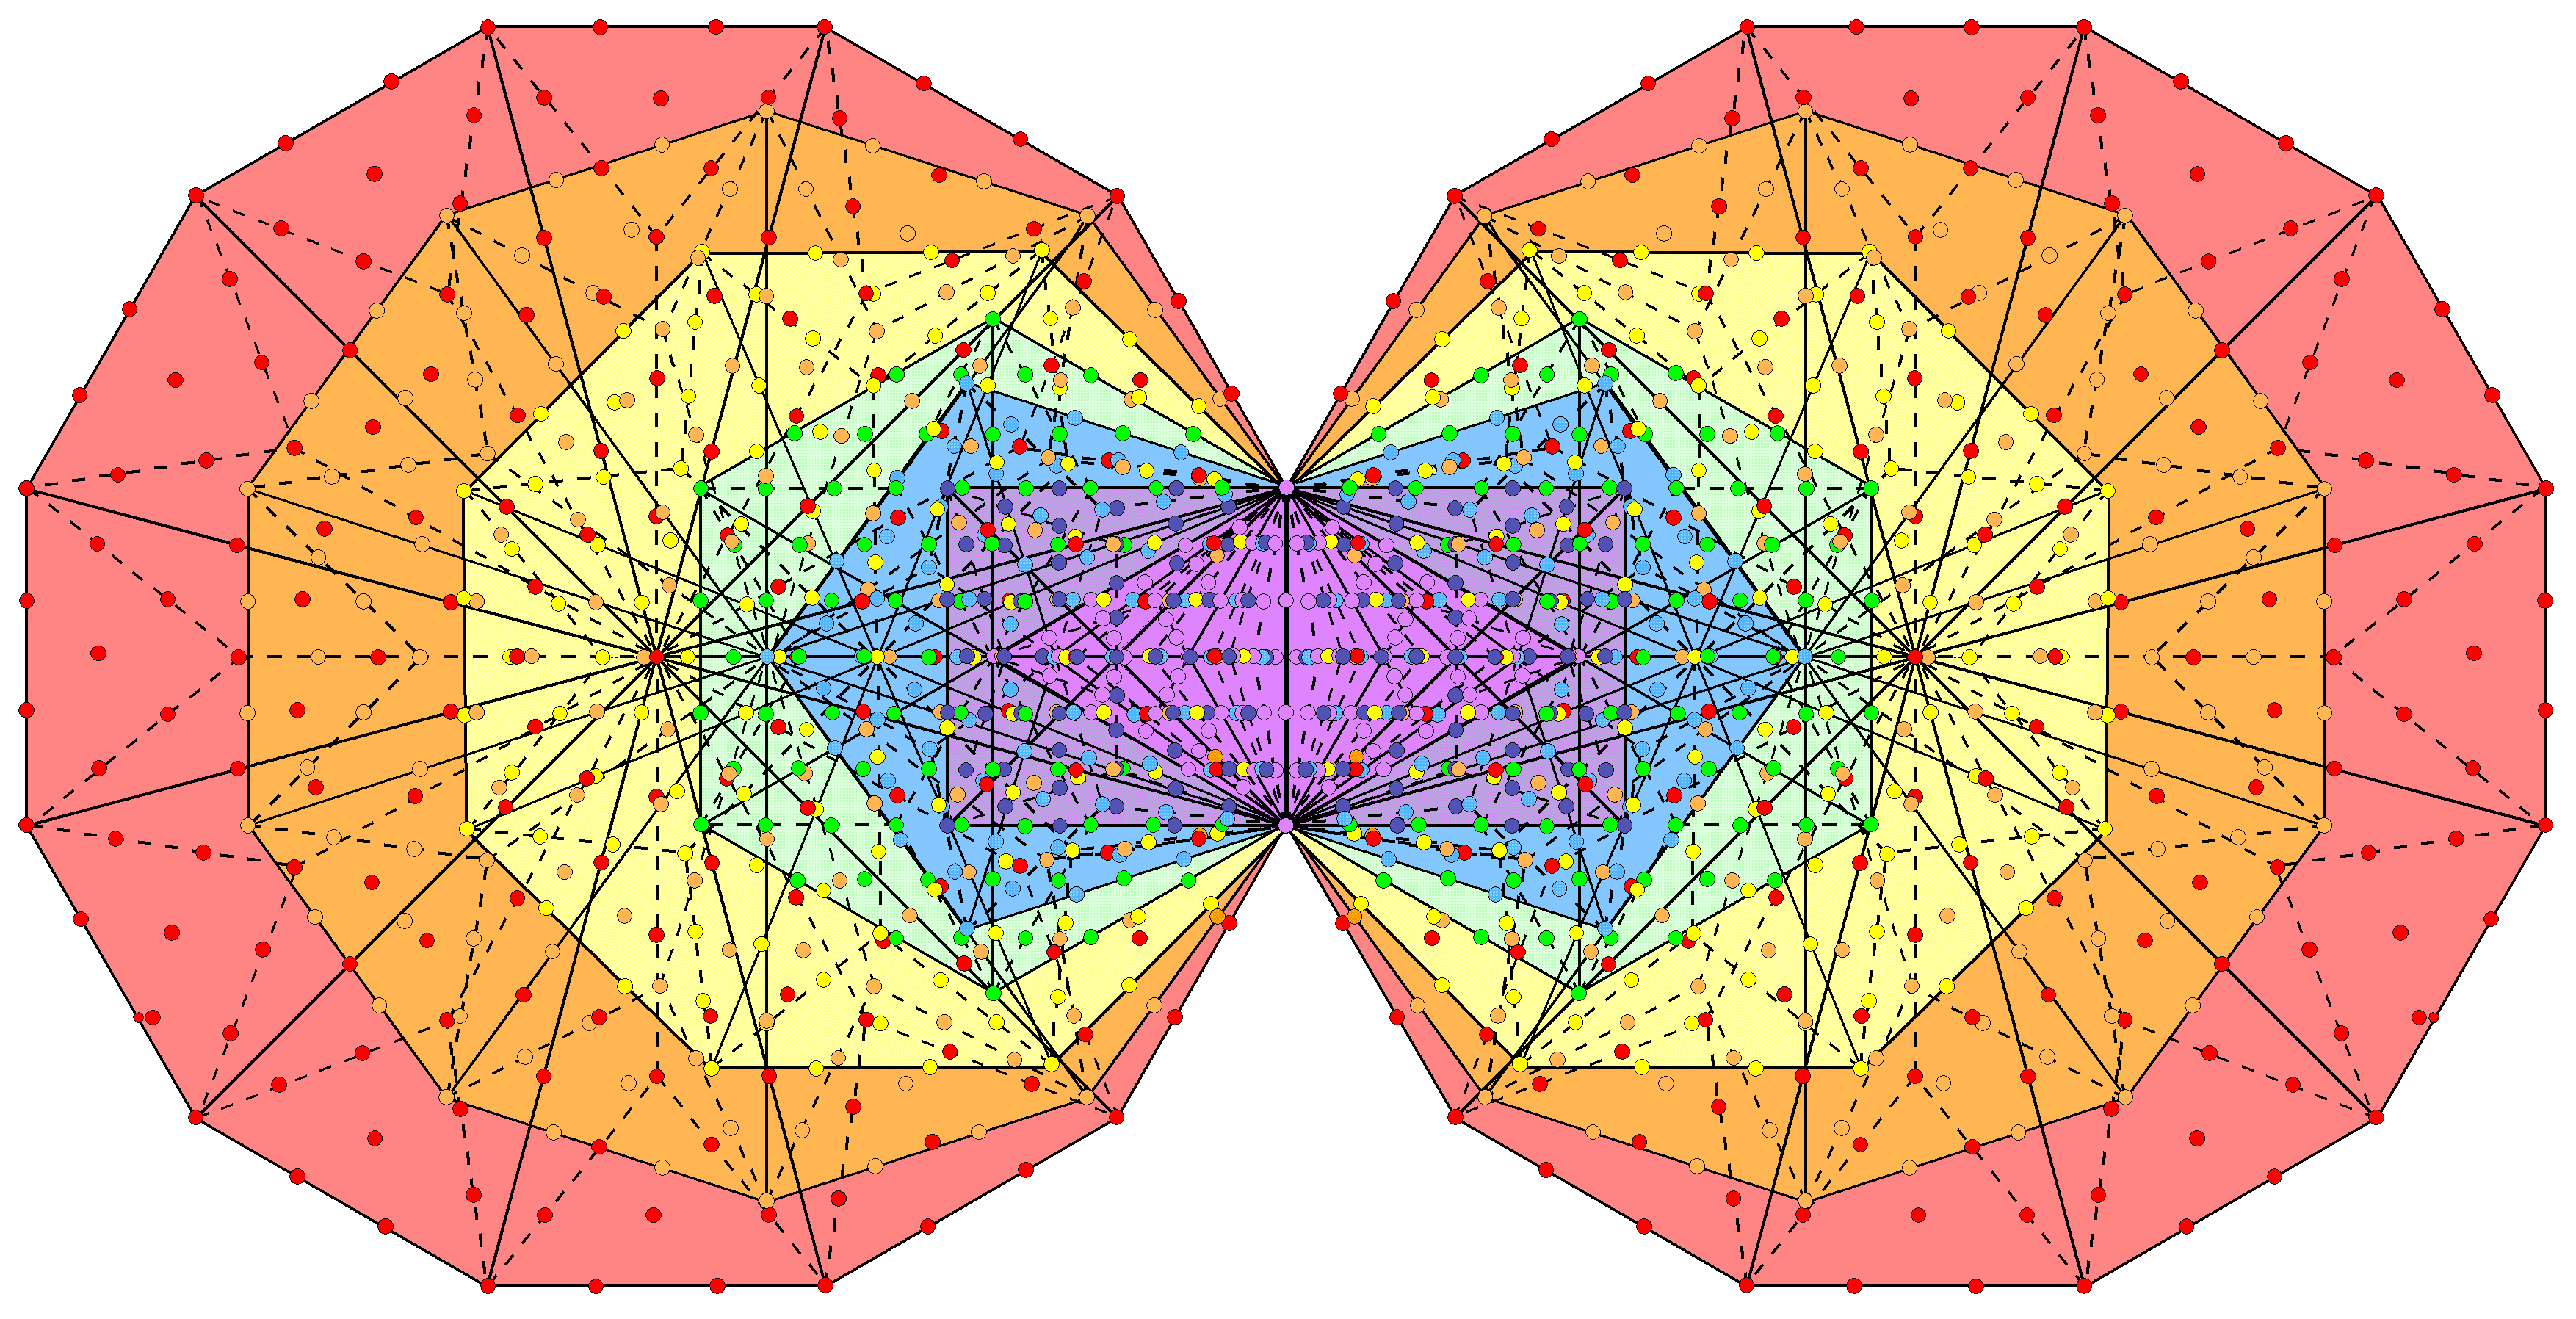 1370 yods in (7+7) Type B polygons